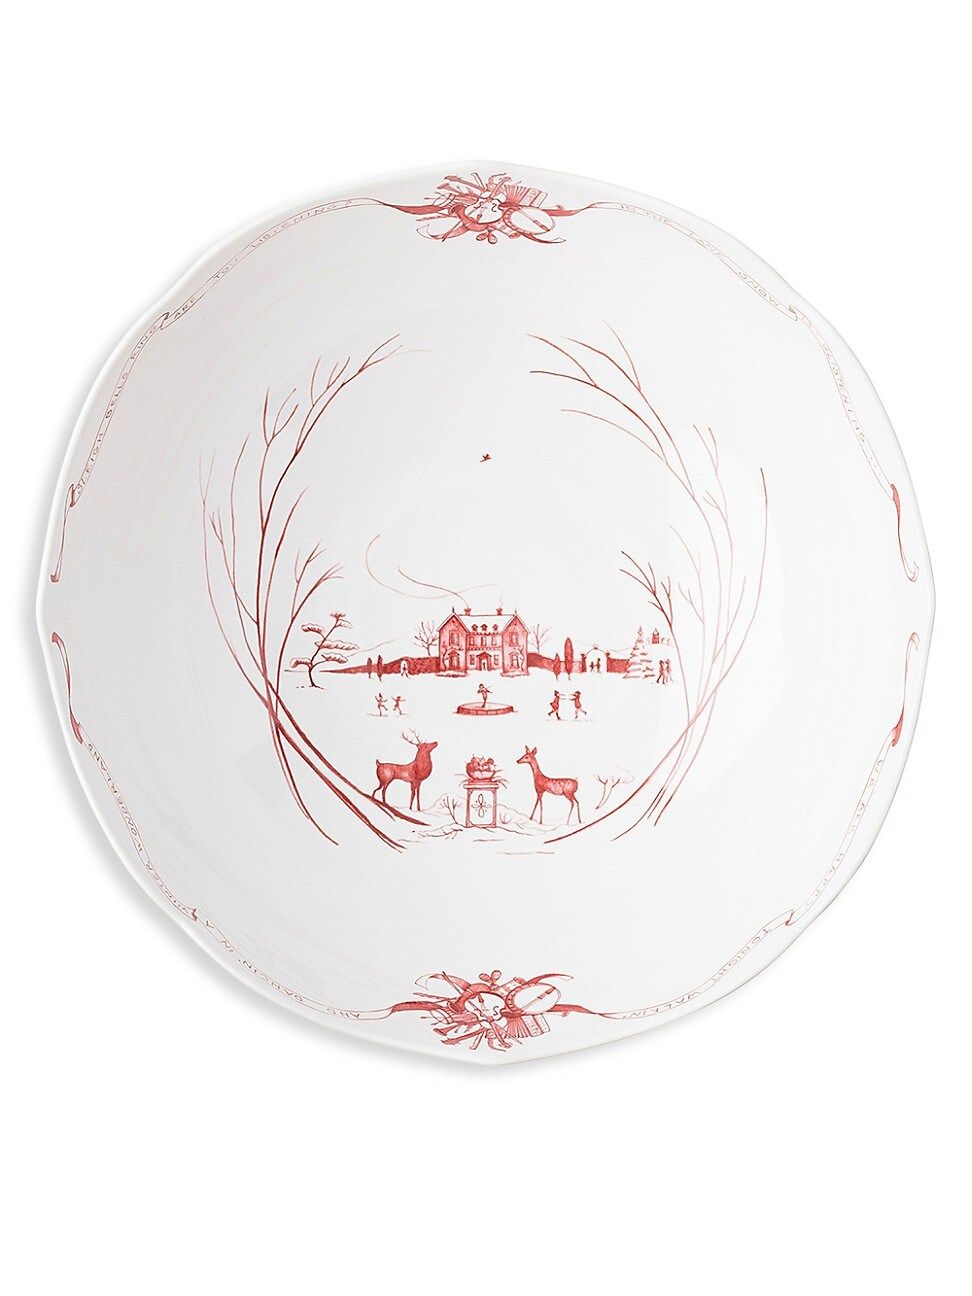 Country Estate Winter Frolic Centerpiece Bowl | Saks Fifth Avenue